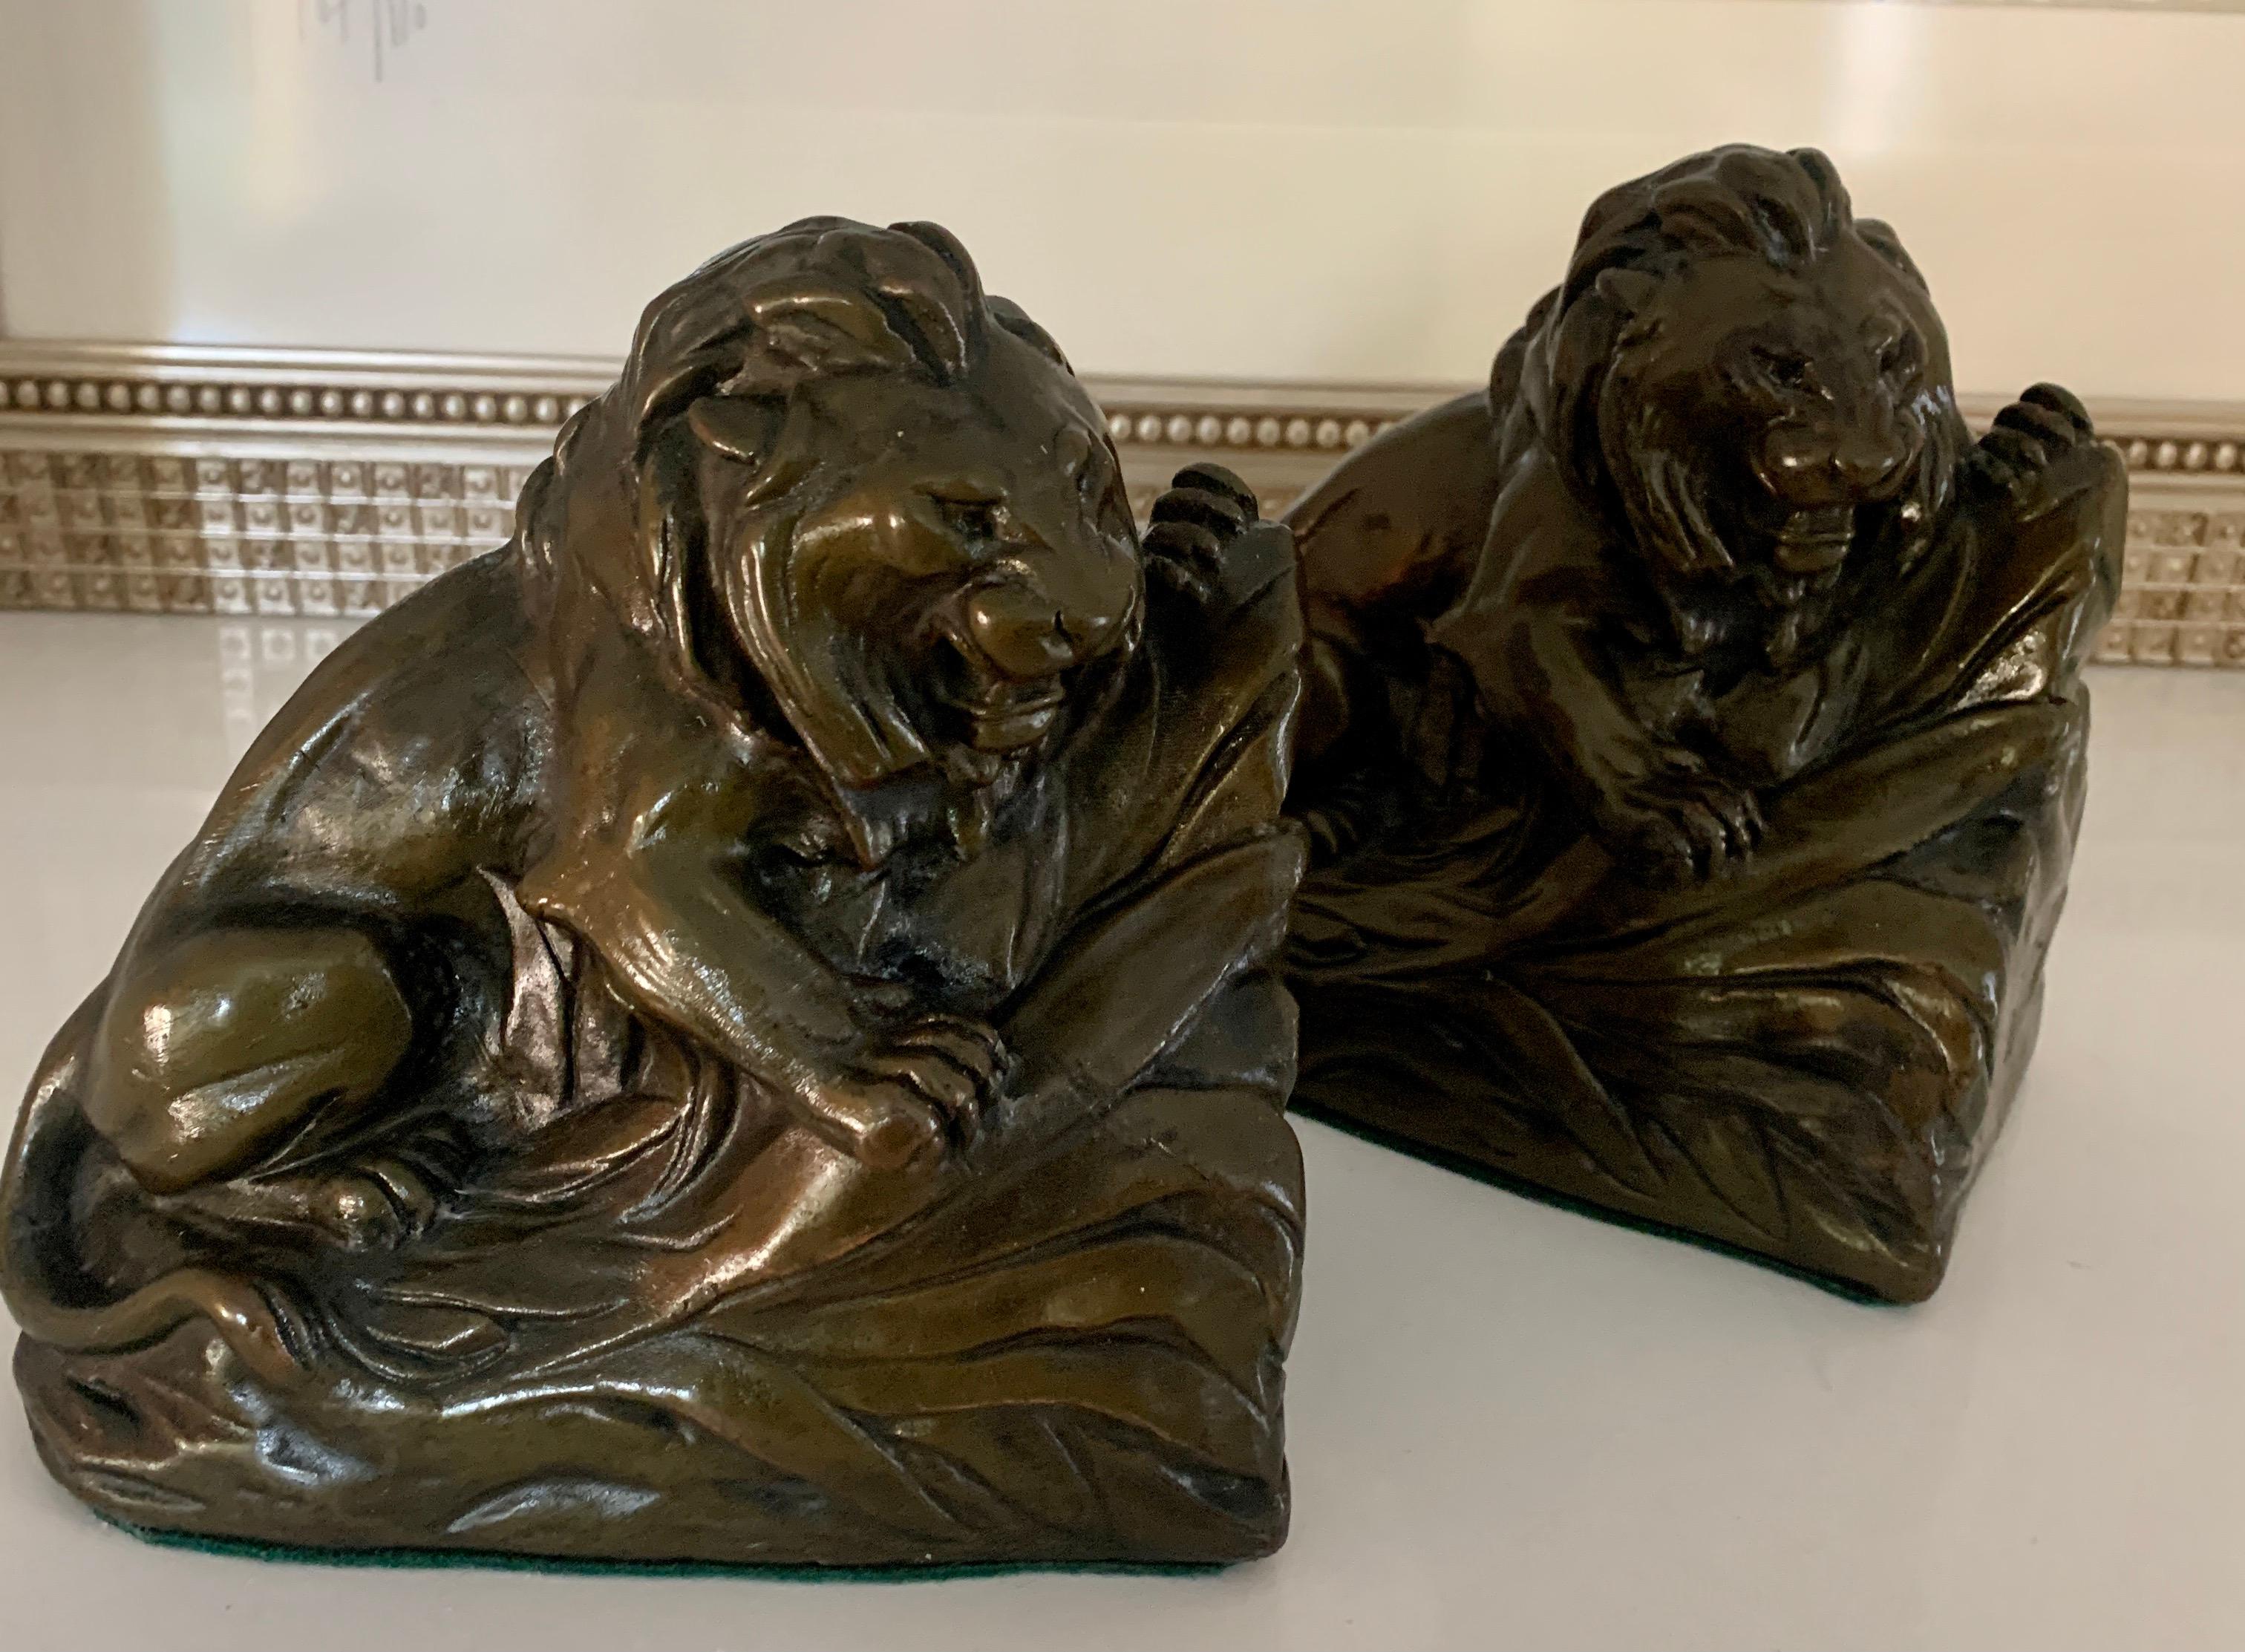 A wonderful and heavy pair of Lion bookends - clad in bronze finish, the bookends are by RUHL and a compliment to any desk or bookshelf.